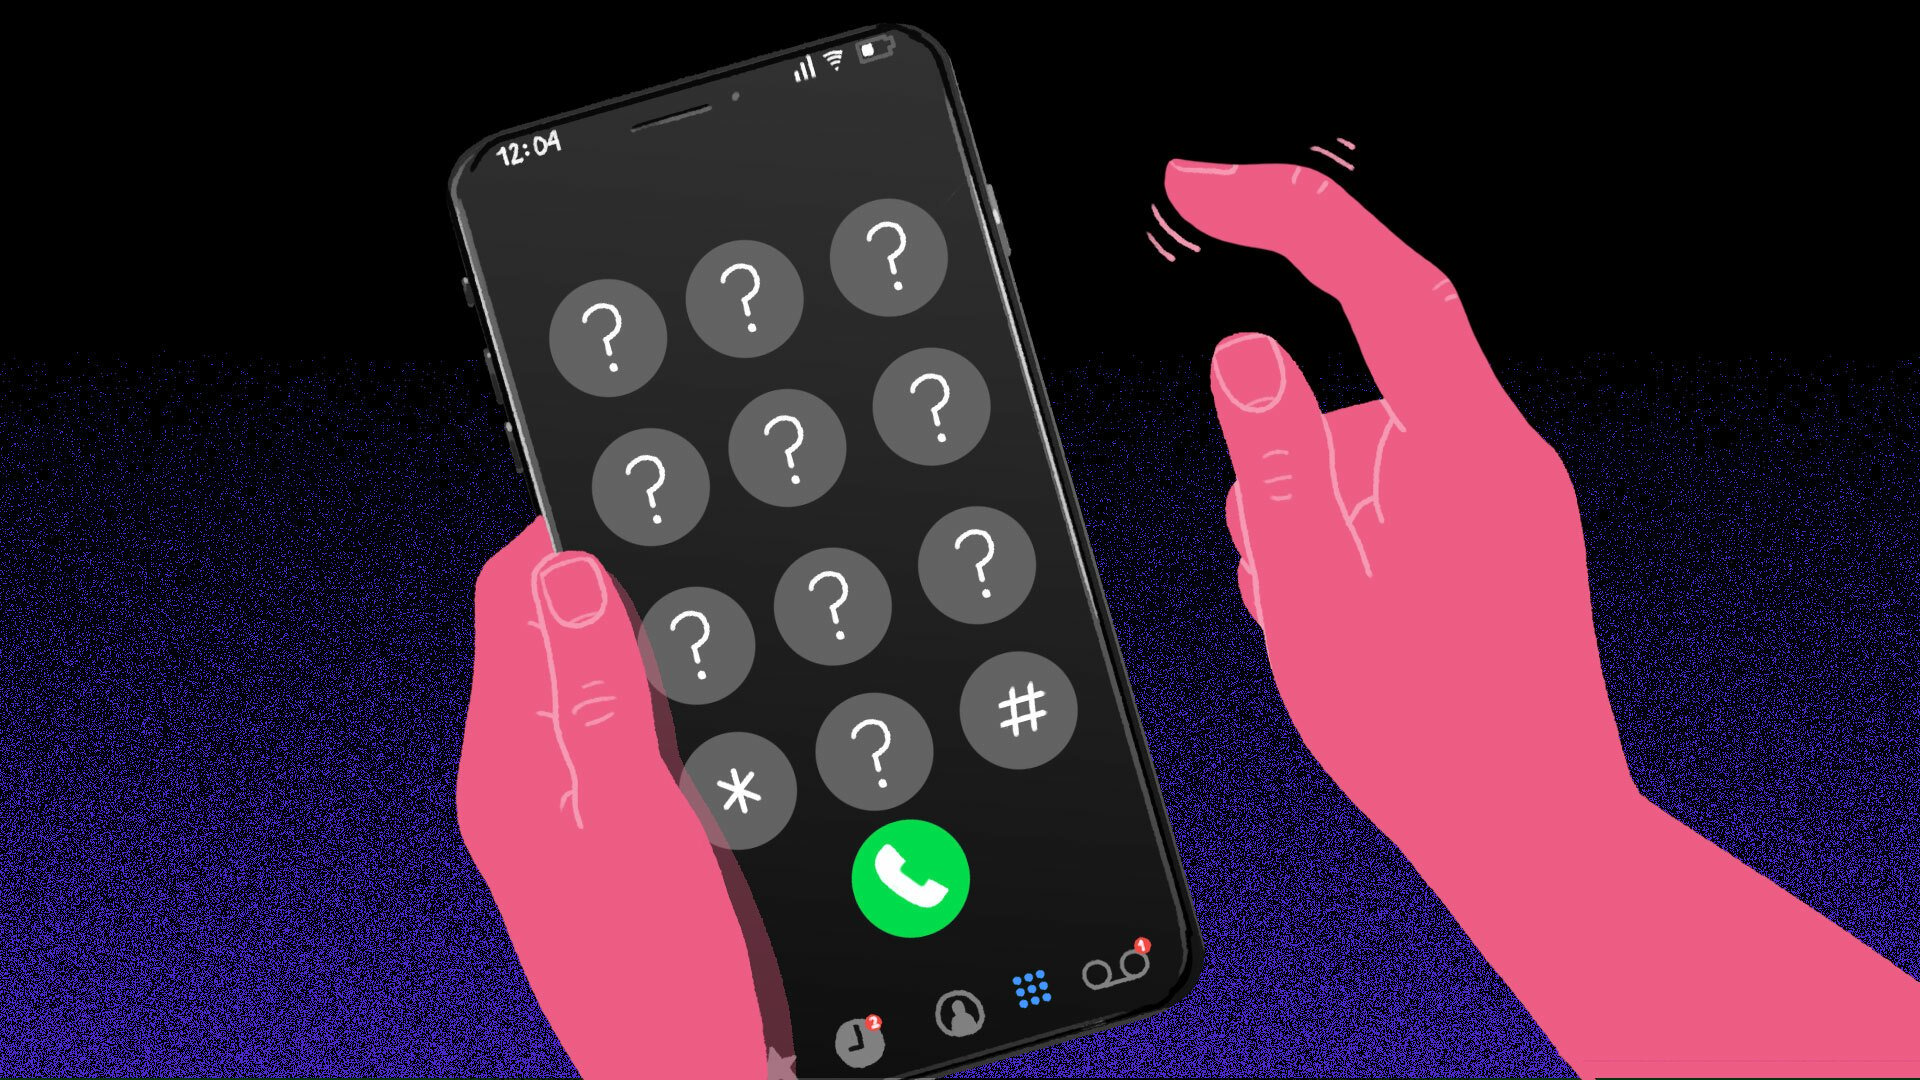 An illustration of hands typing on a phone.